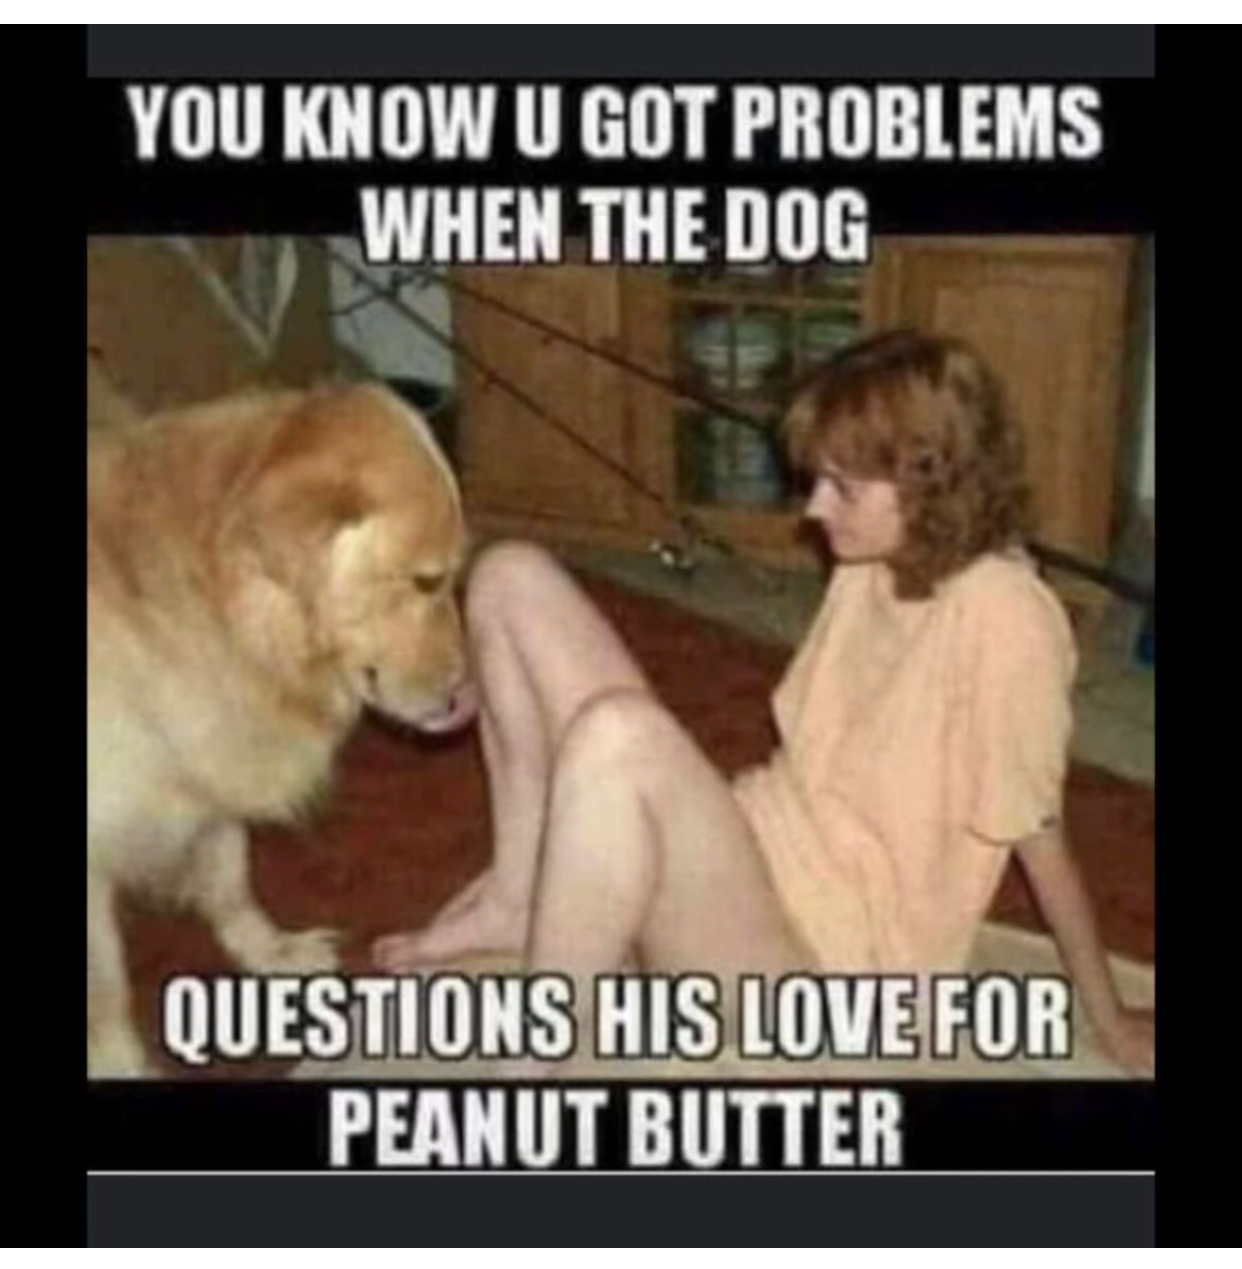 Dog licking peanut butter off dick